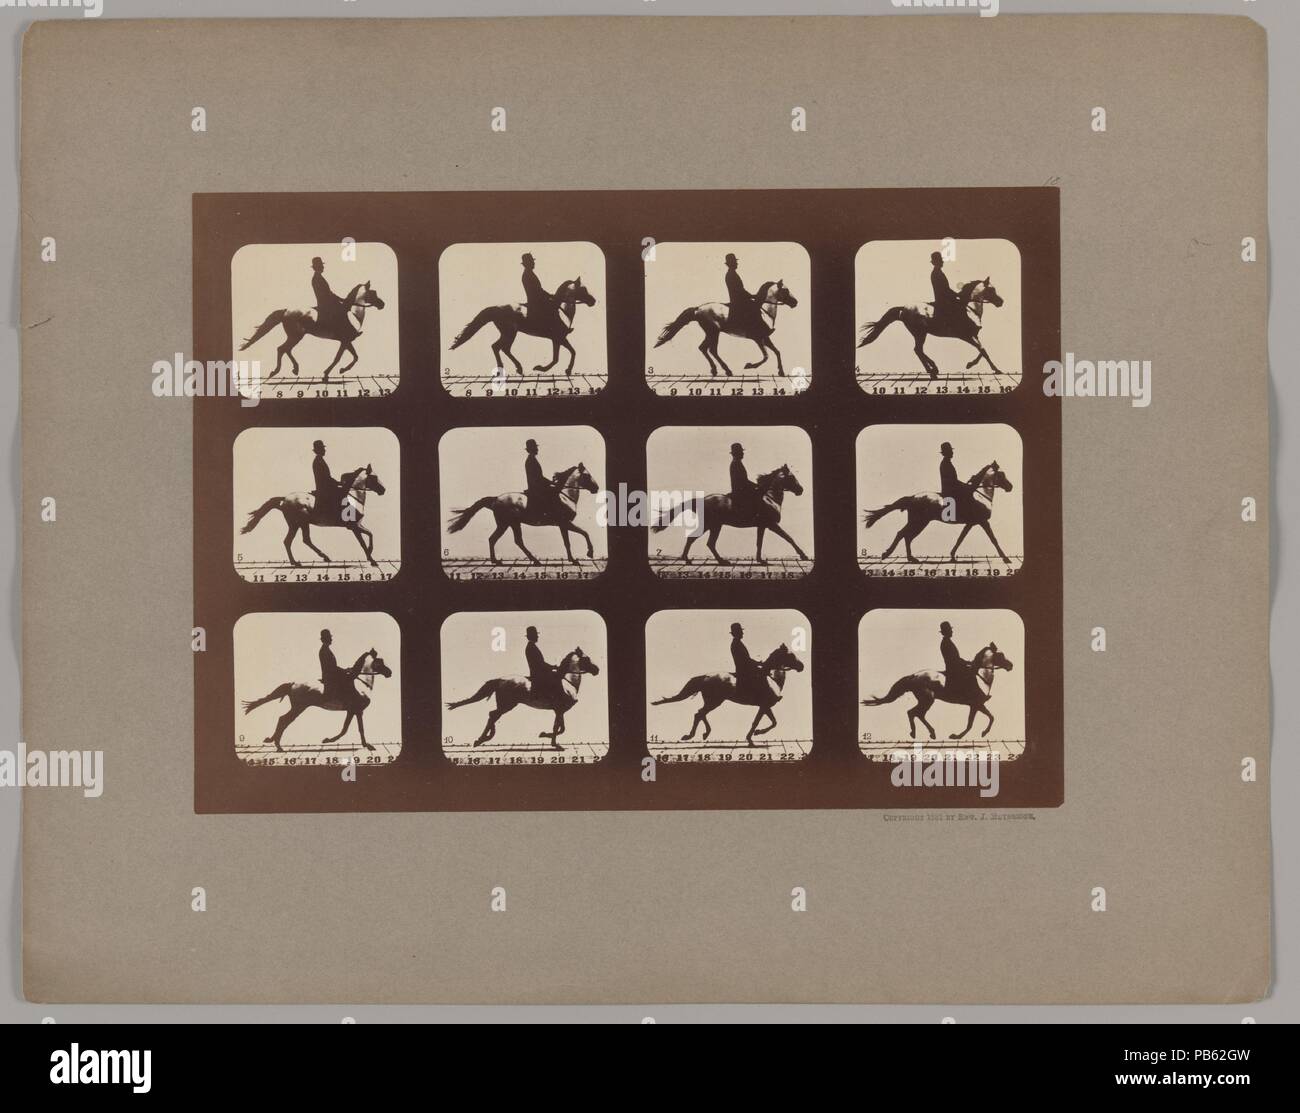 Attitudes of Animals in Motion. Artist: Eadweard Muybridge (American, born Britain, 1830-1904). Dimensions: Image: 6 5/16 × 9 15/16 in. (16 × 25.3 cm)  Mount: 8 13/16 × 12 5/8 in. (22.4 × 32 cm). Date: 1879, printed 1881.  In 1872, Leland Stanford, former governor of California and president of the Central Pacific Railroad, asked Eadweard Muybridge to photograph a horse galloping at full speed. This simple request, intended to confirm Stanford's theory that all of the horse's feet were off the ground simultaneously at some point during its stride, launched Muybridge on a lifelong pursuit to re Stock Photo